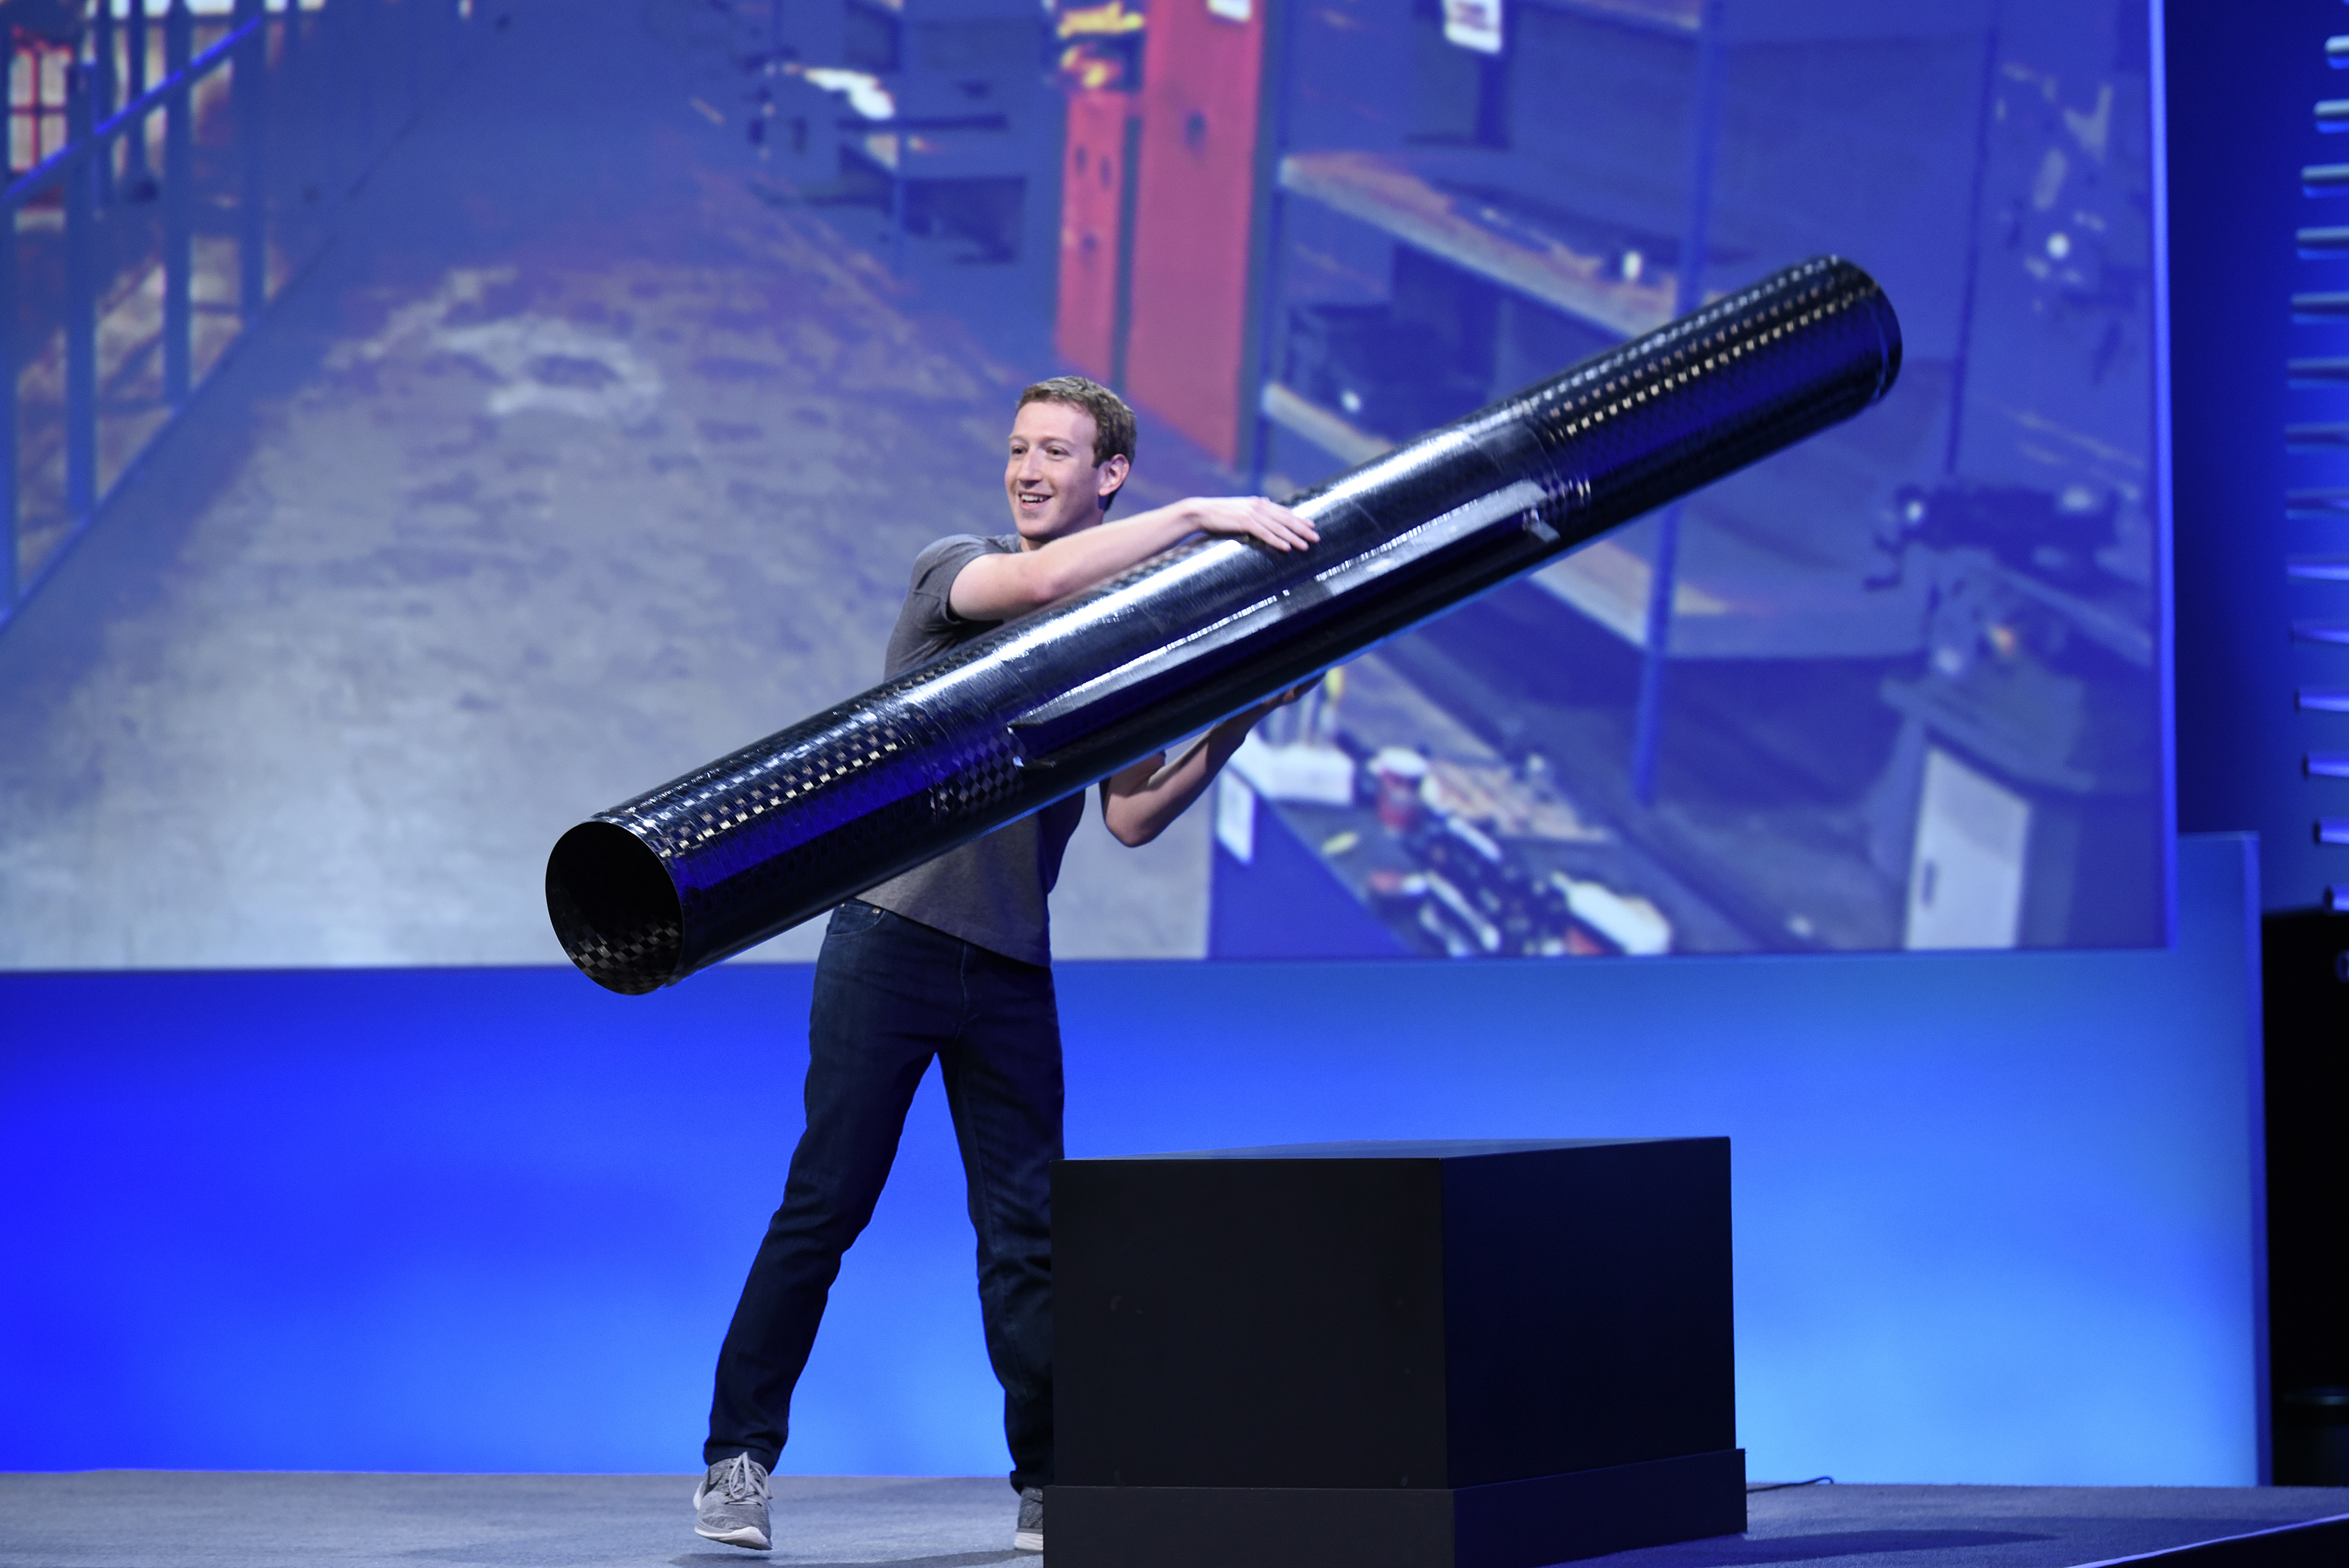 Mark Zuckerberg holds a propeller pod for Aquila, the company's unmanned aircraft that will be used to deliver wifi to developing nations, in San Francisco, California, on April 12, 2016. (Michael Short—Bloomberg/Getty Images)